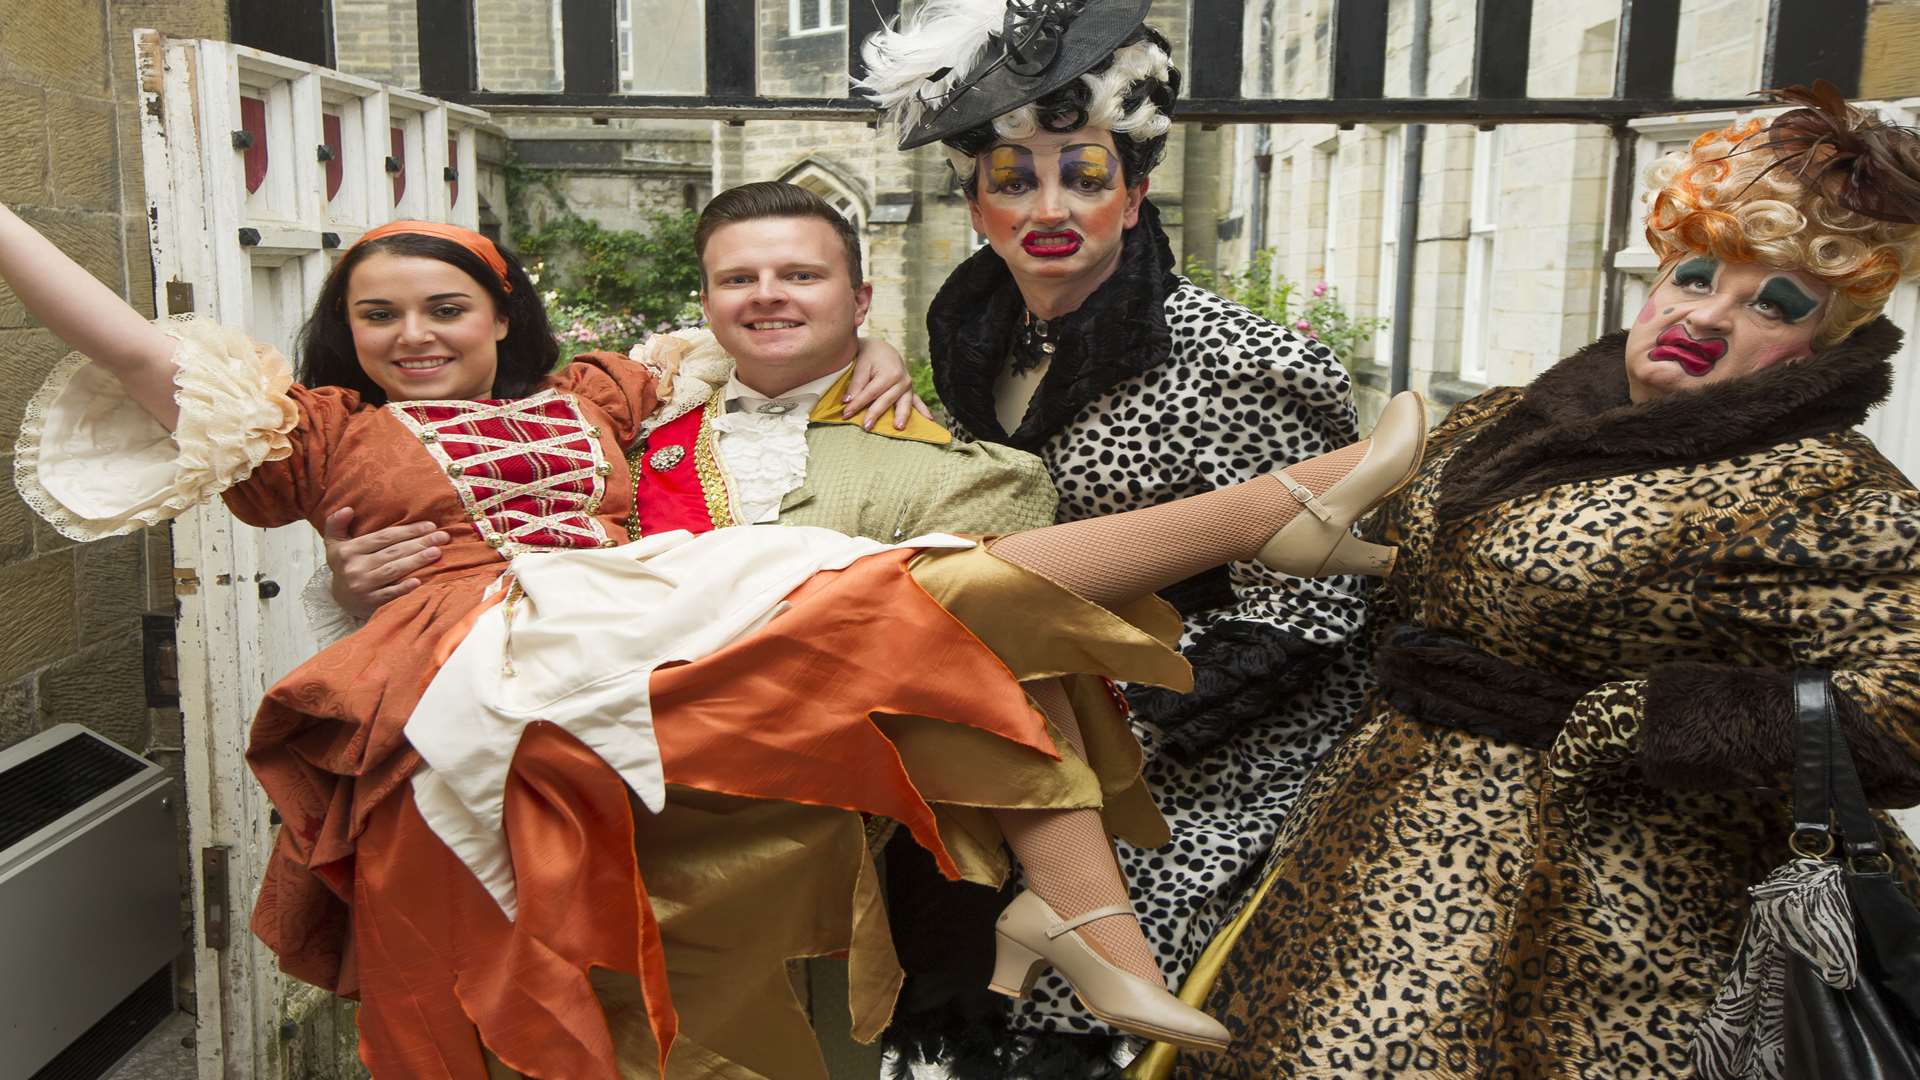 Cinderella is this year's panto at the Assembly Hall Theatre in Tunbridge Wells